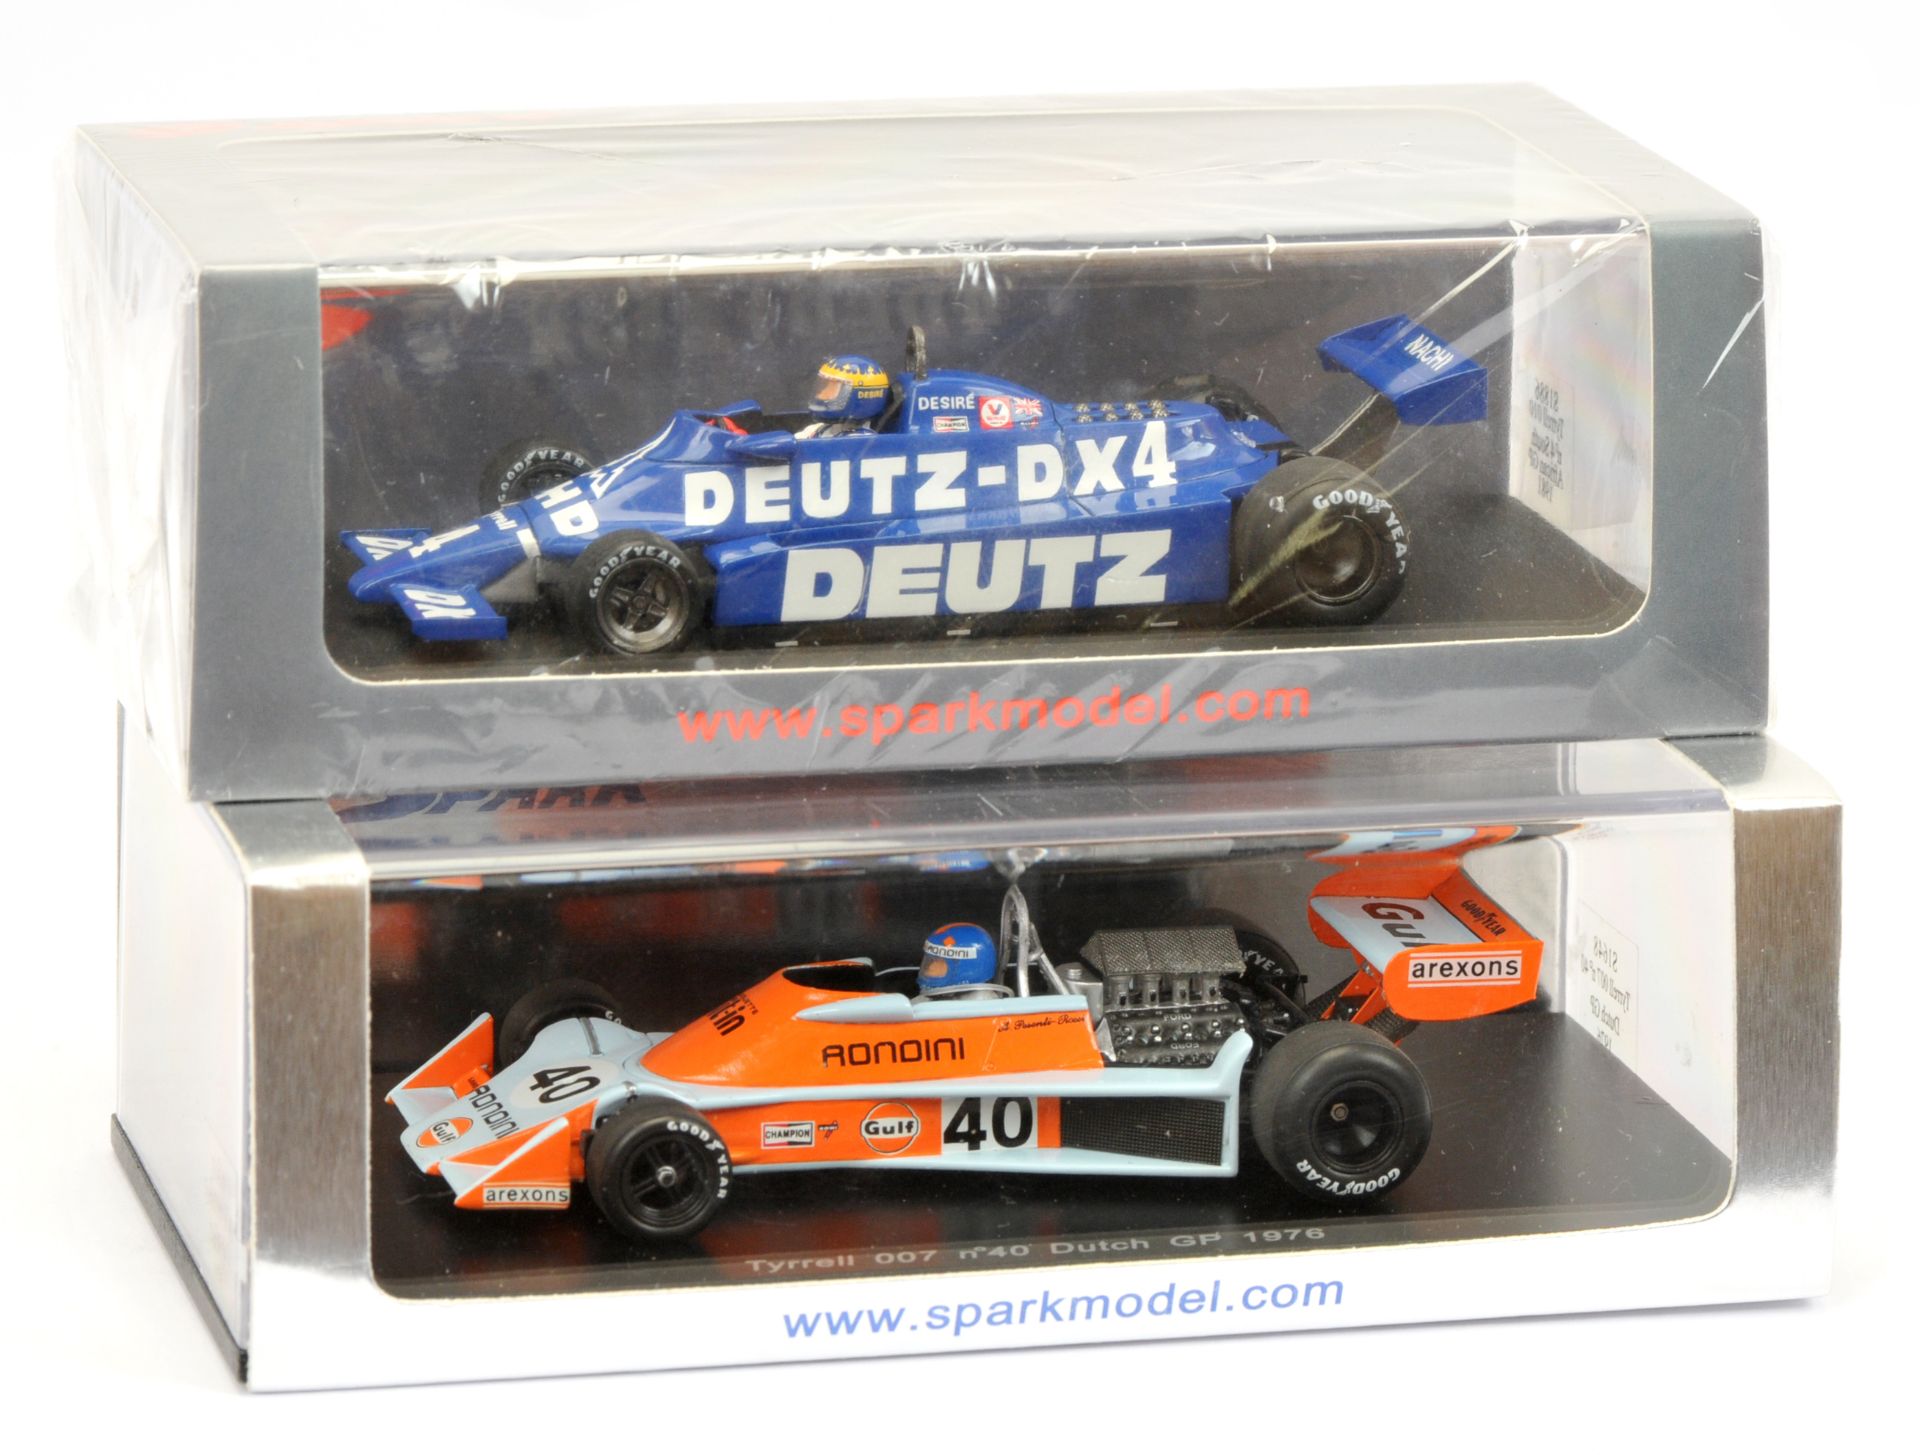 Pair of Spark racing models, scale 1:43, S 1886 Tyrrell 010 Africa GP 1981 